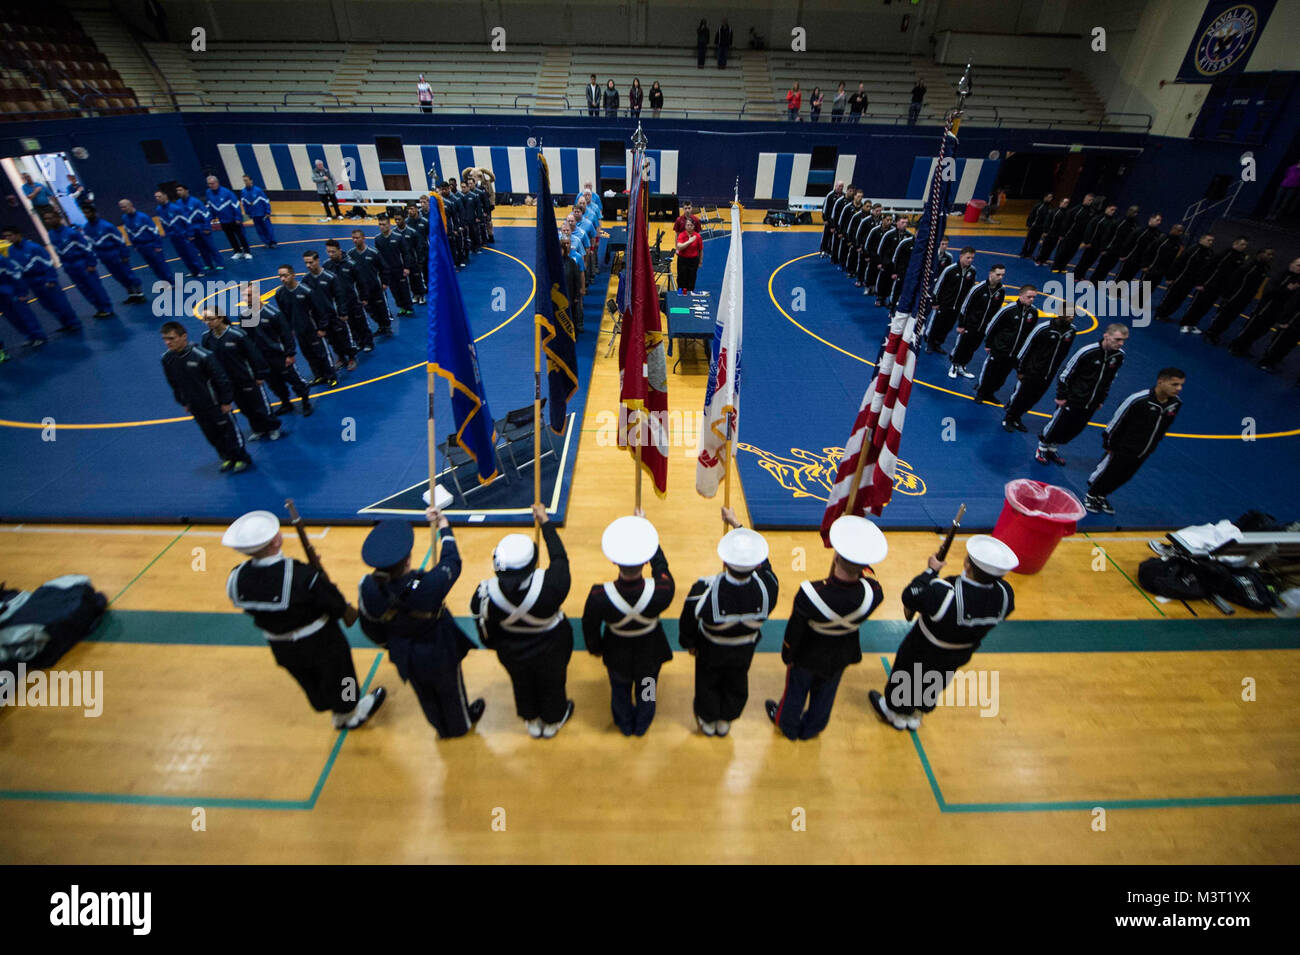 160220-N-OO032-033 BREMERTON, Wash. (Feb 20, 2016) - An Armed Forces color guard presents the colors during the aational anthem for the opening ceremony of the 2016 Armed Forces Wrestling Championship Greco-Roman wrestling tournament at Naval Base Kitsap-Bremerton. The tournament is held over two days, one for Greco-Roman style wrestling and the other freestyle, between the Army, Navy, Marine Corps and Air Force. It's an Olympic qualifier for participants wrestling Greco-Roman. (U.S. Navy photo by Mass Communication Specialist 2nd Class Cory Asato/Released) 160220-N-OO032-033 by Naval Base Kit Stock Photo